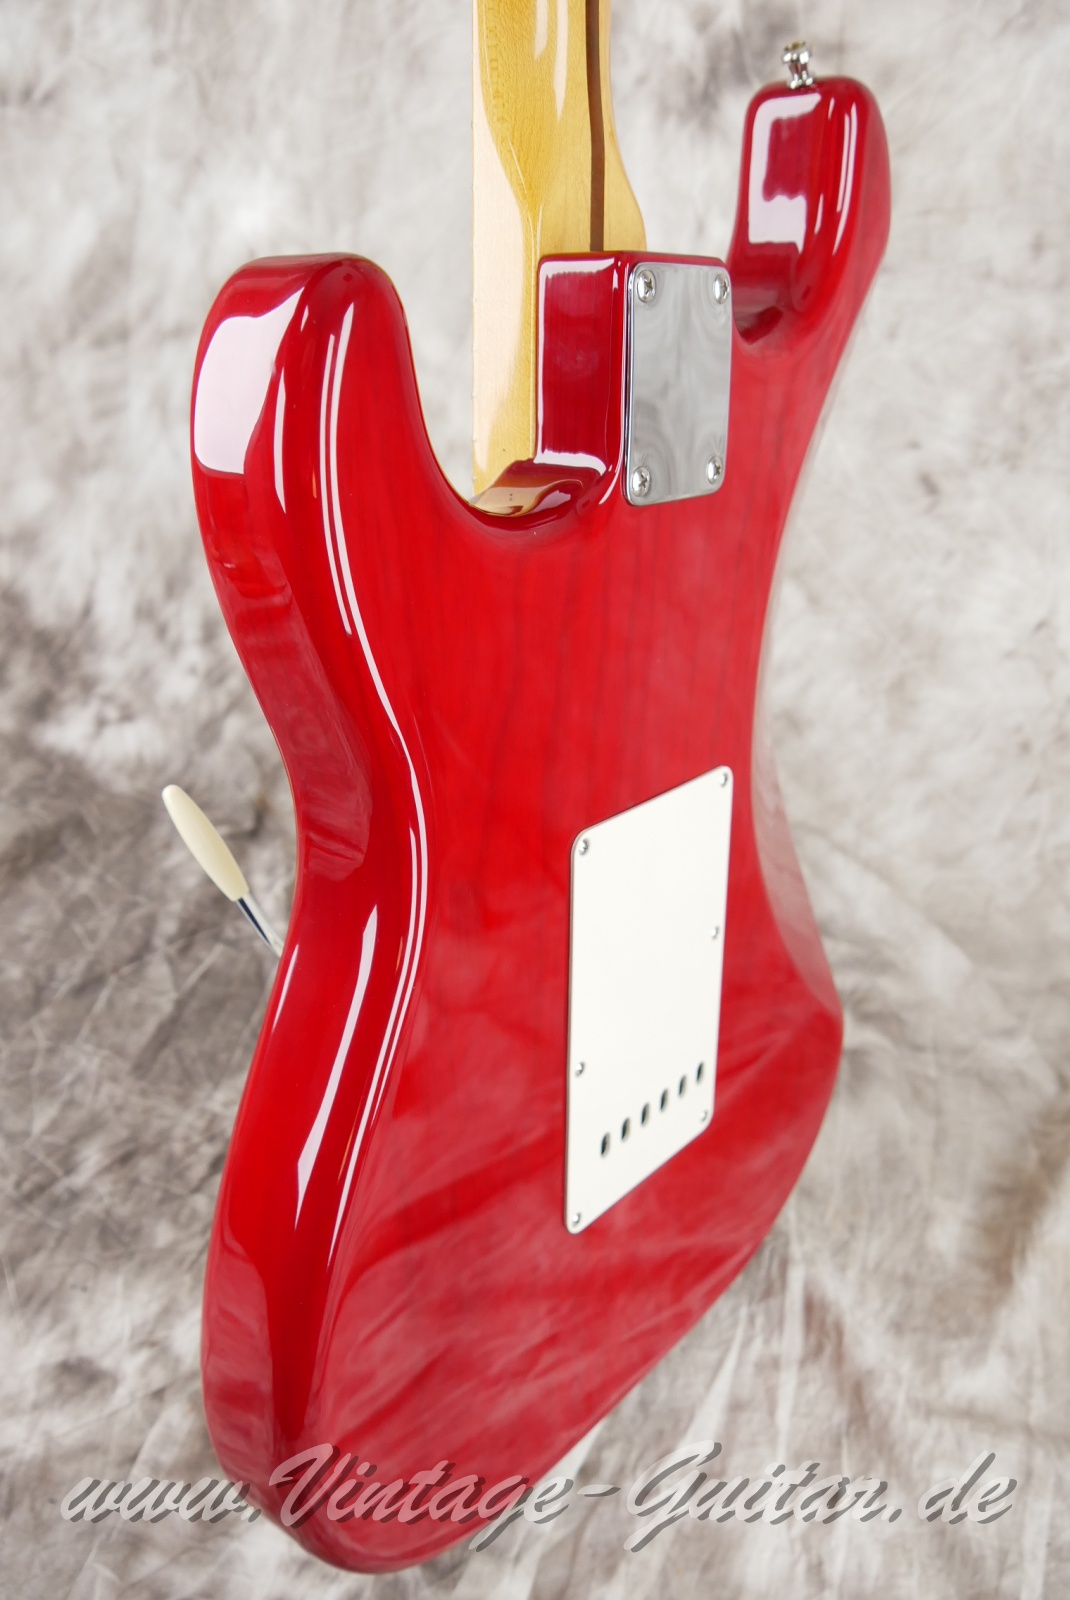 Fender_Stratocaster_classic_50s_Mexico_transparent_red_2010-011.JPG